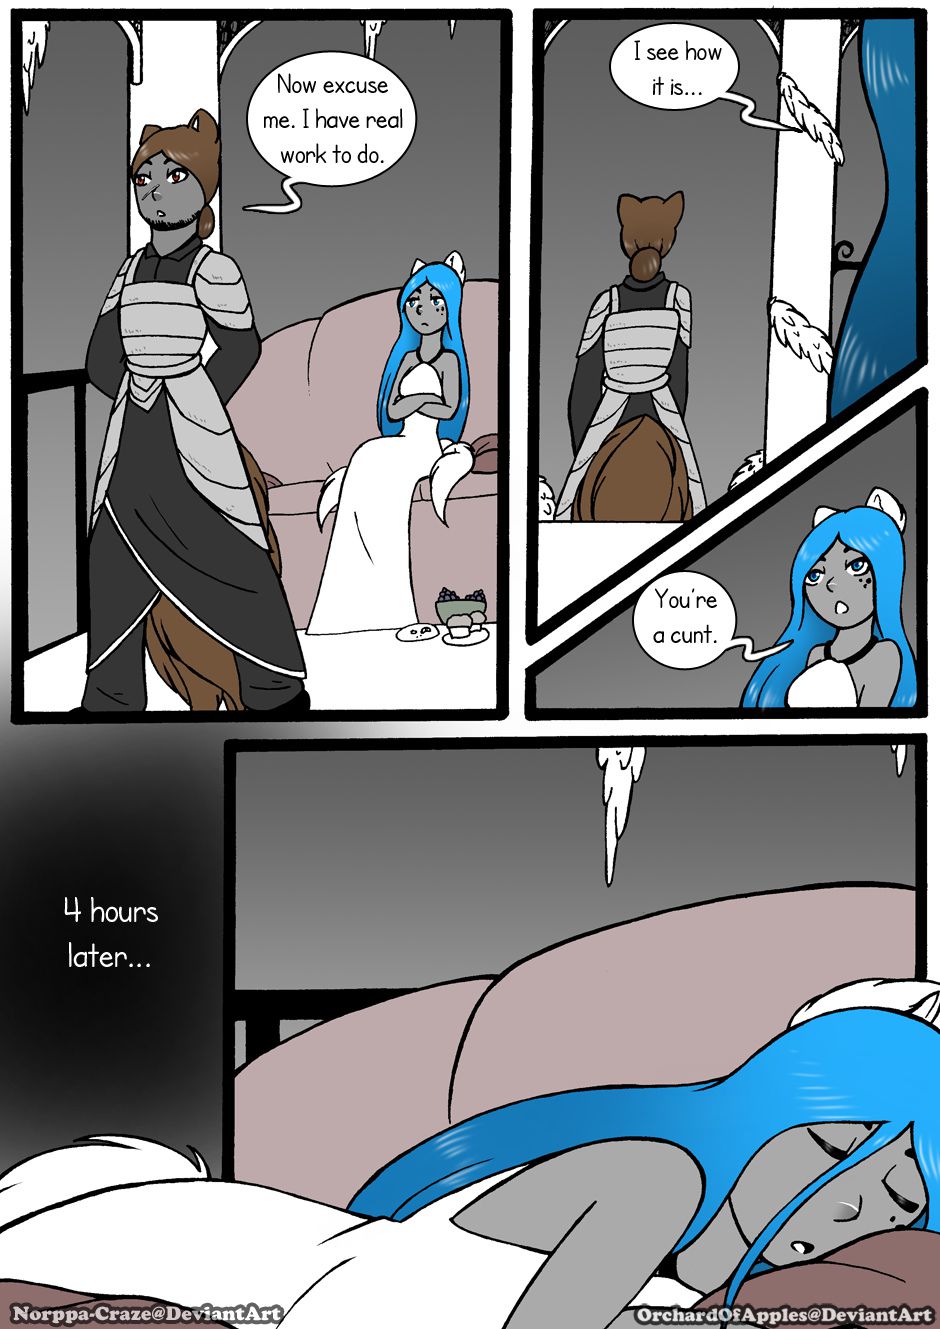 [Jeny-jen94] Between Kings and Queens [Ongoing] 251